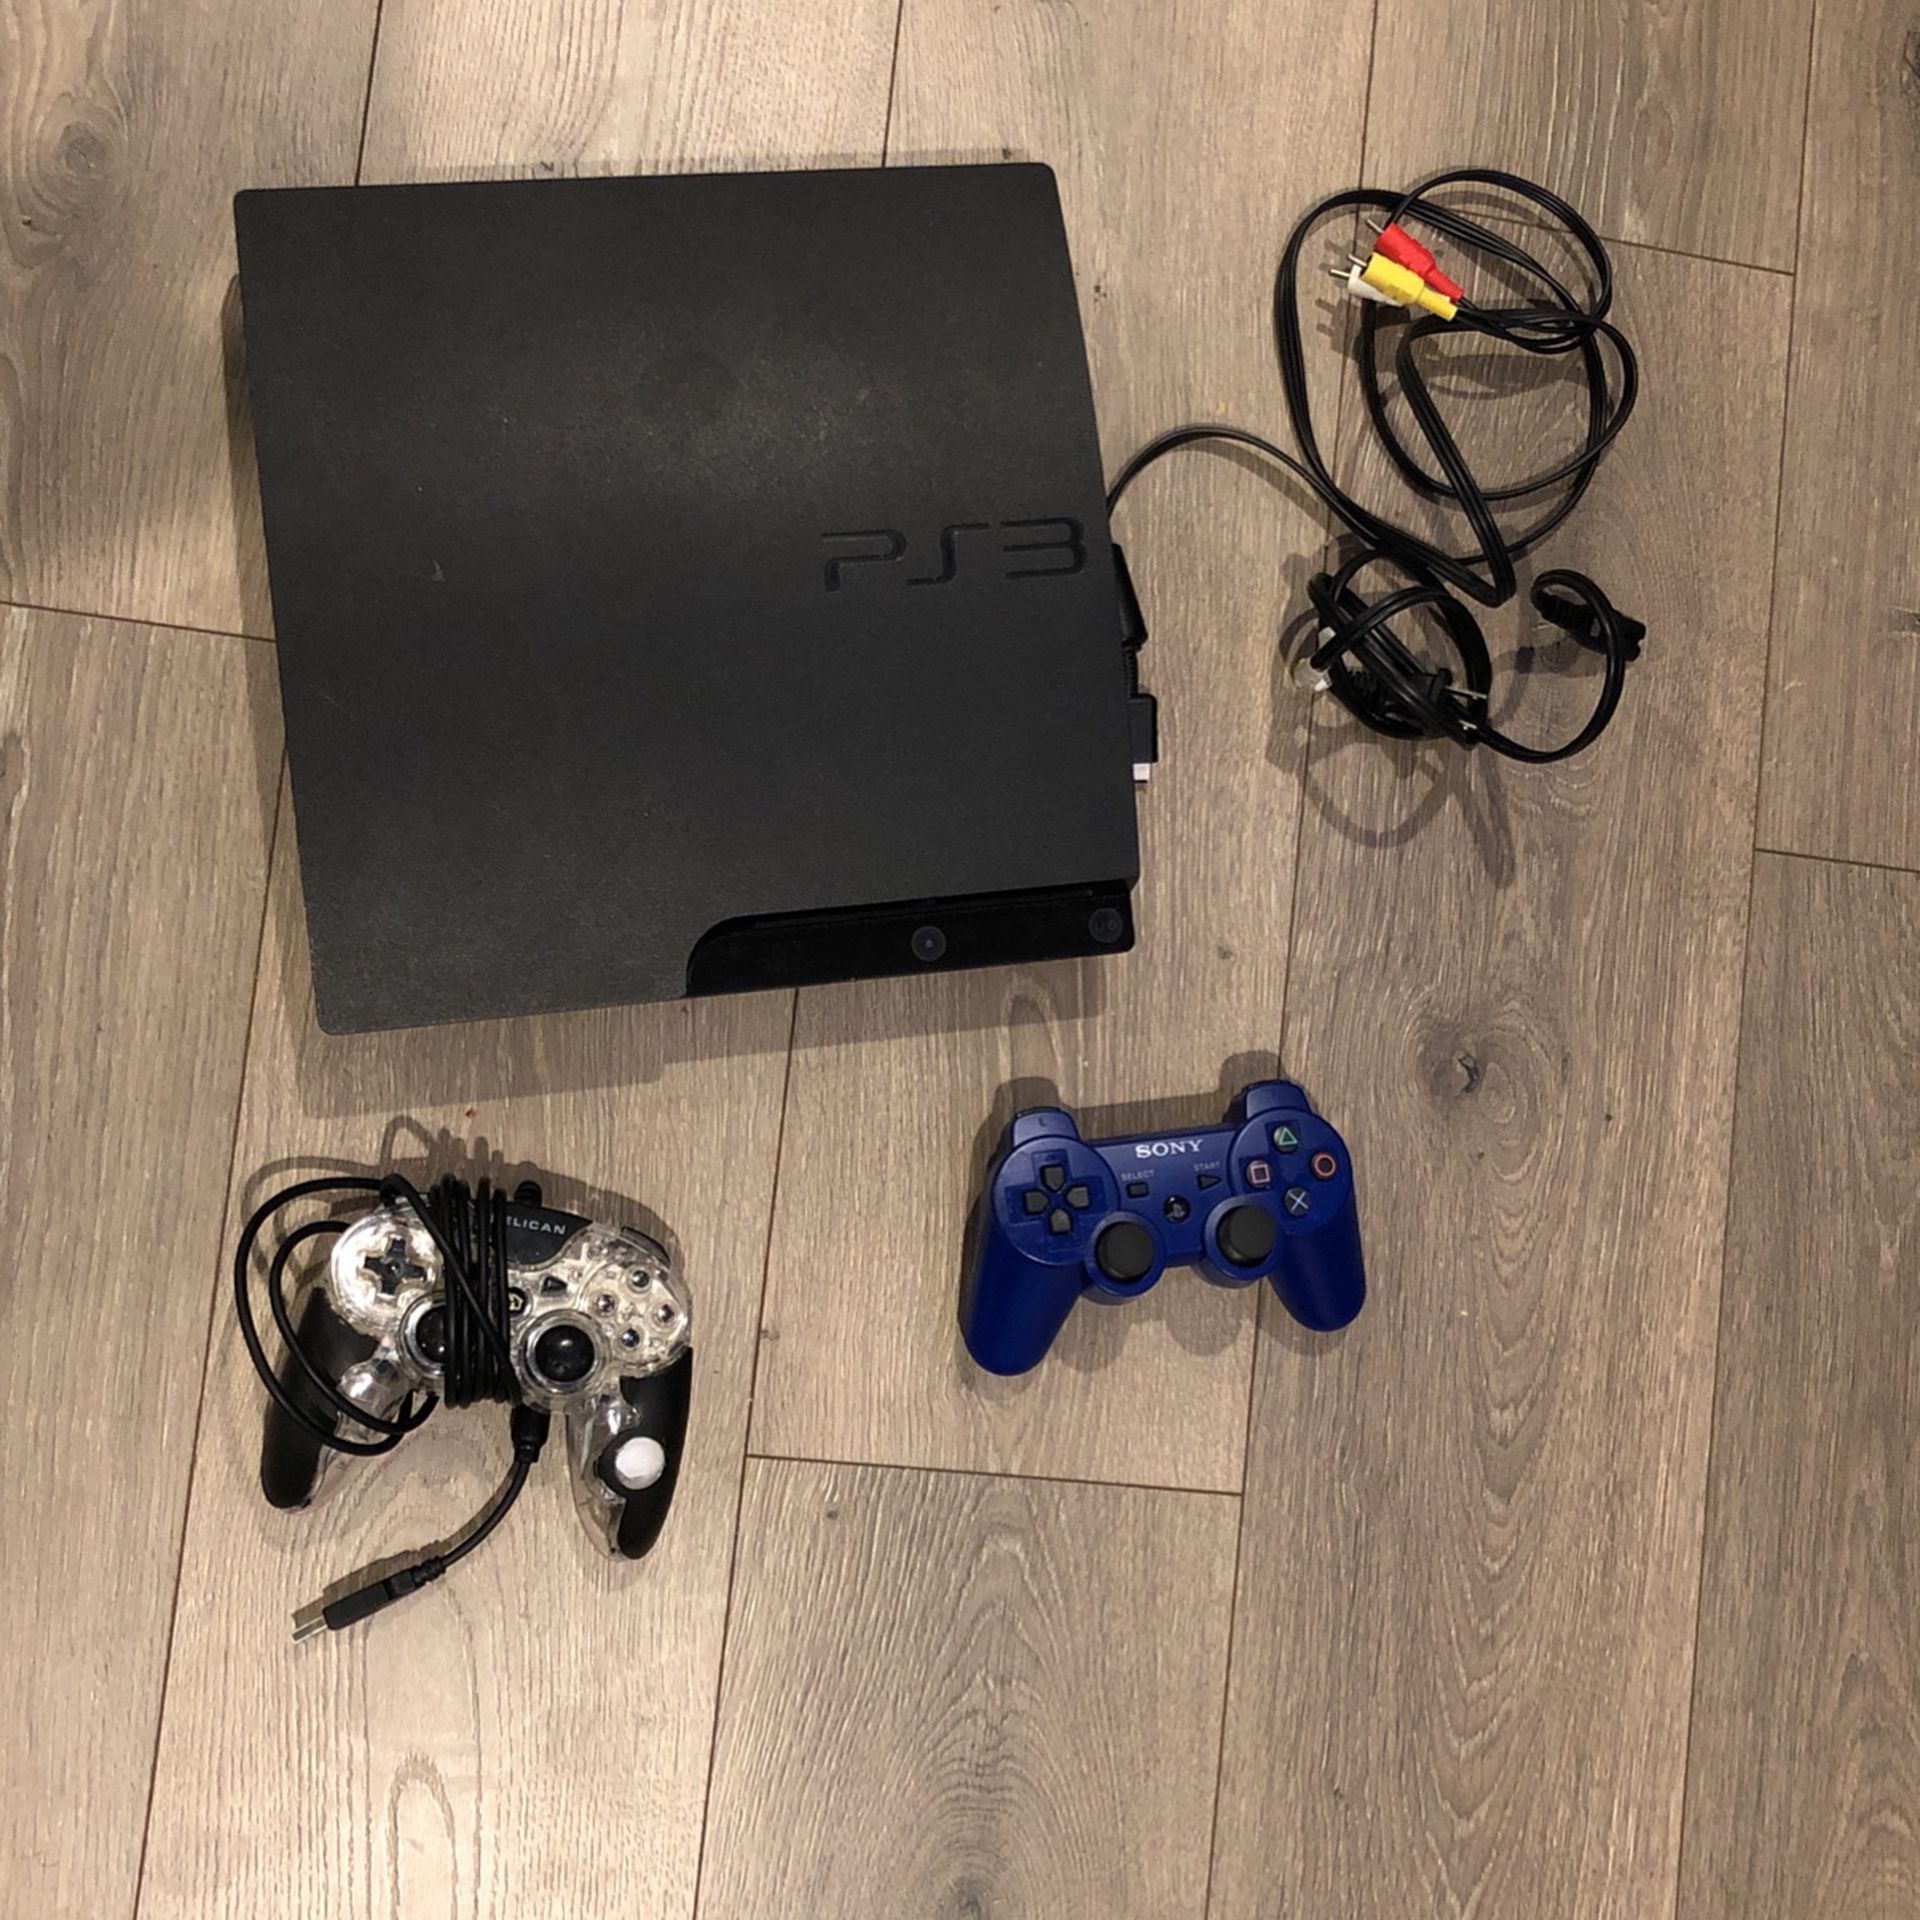 PS3 Slim With 2 Controllers